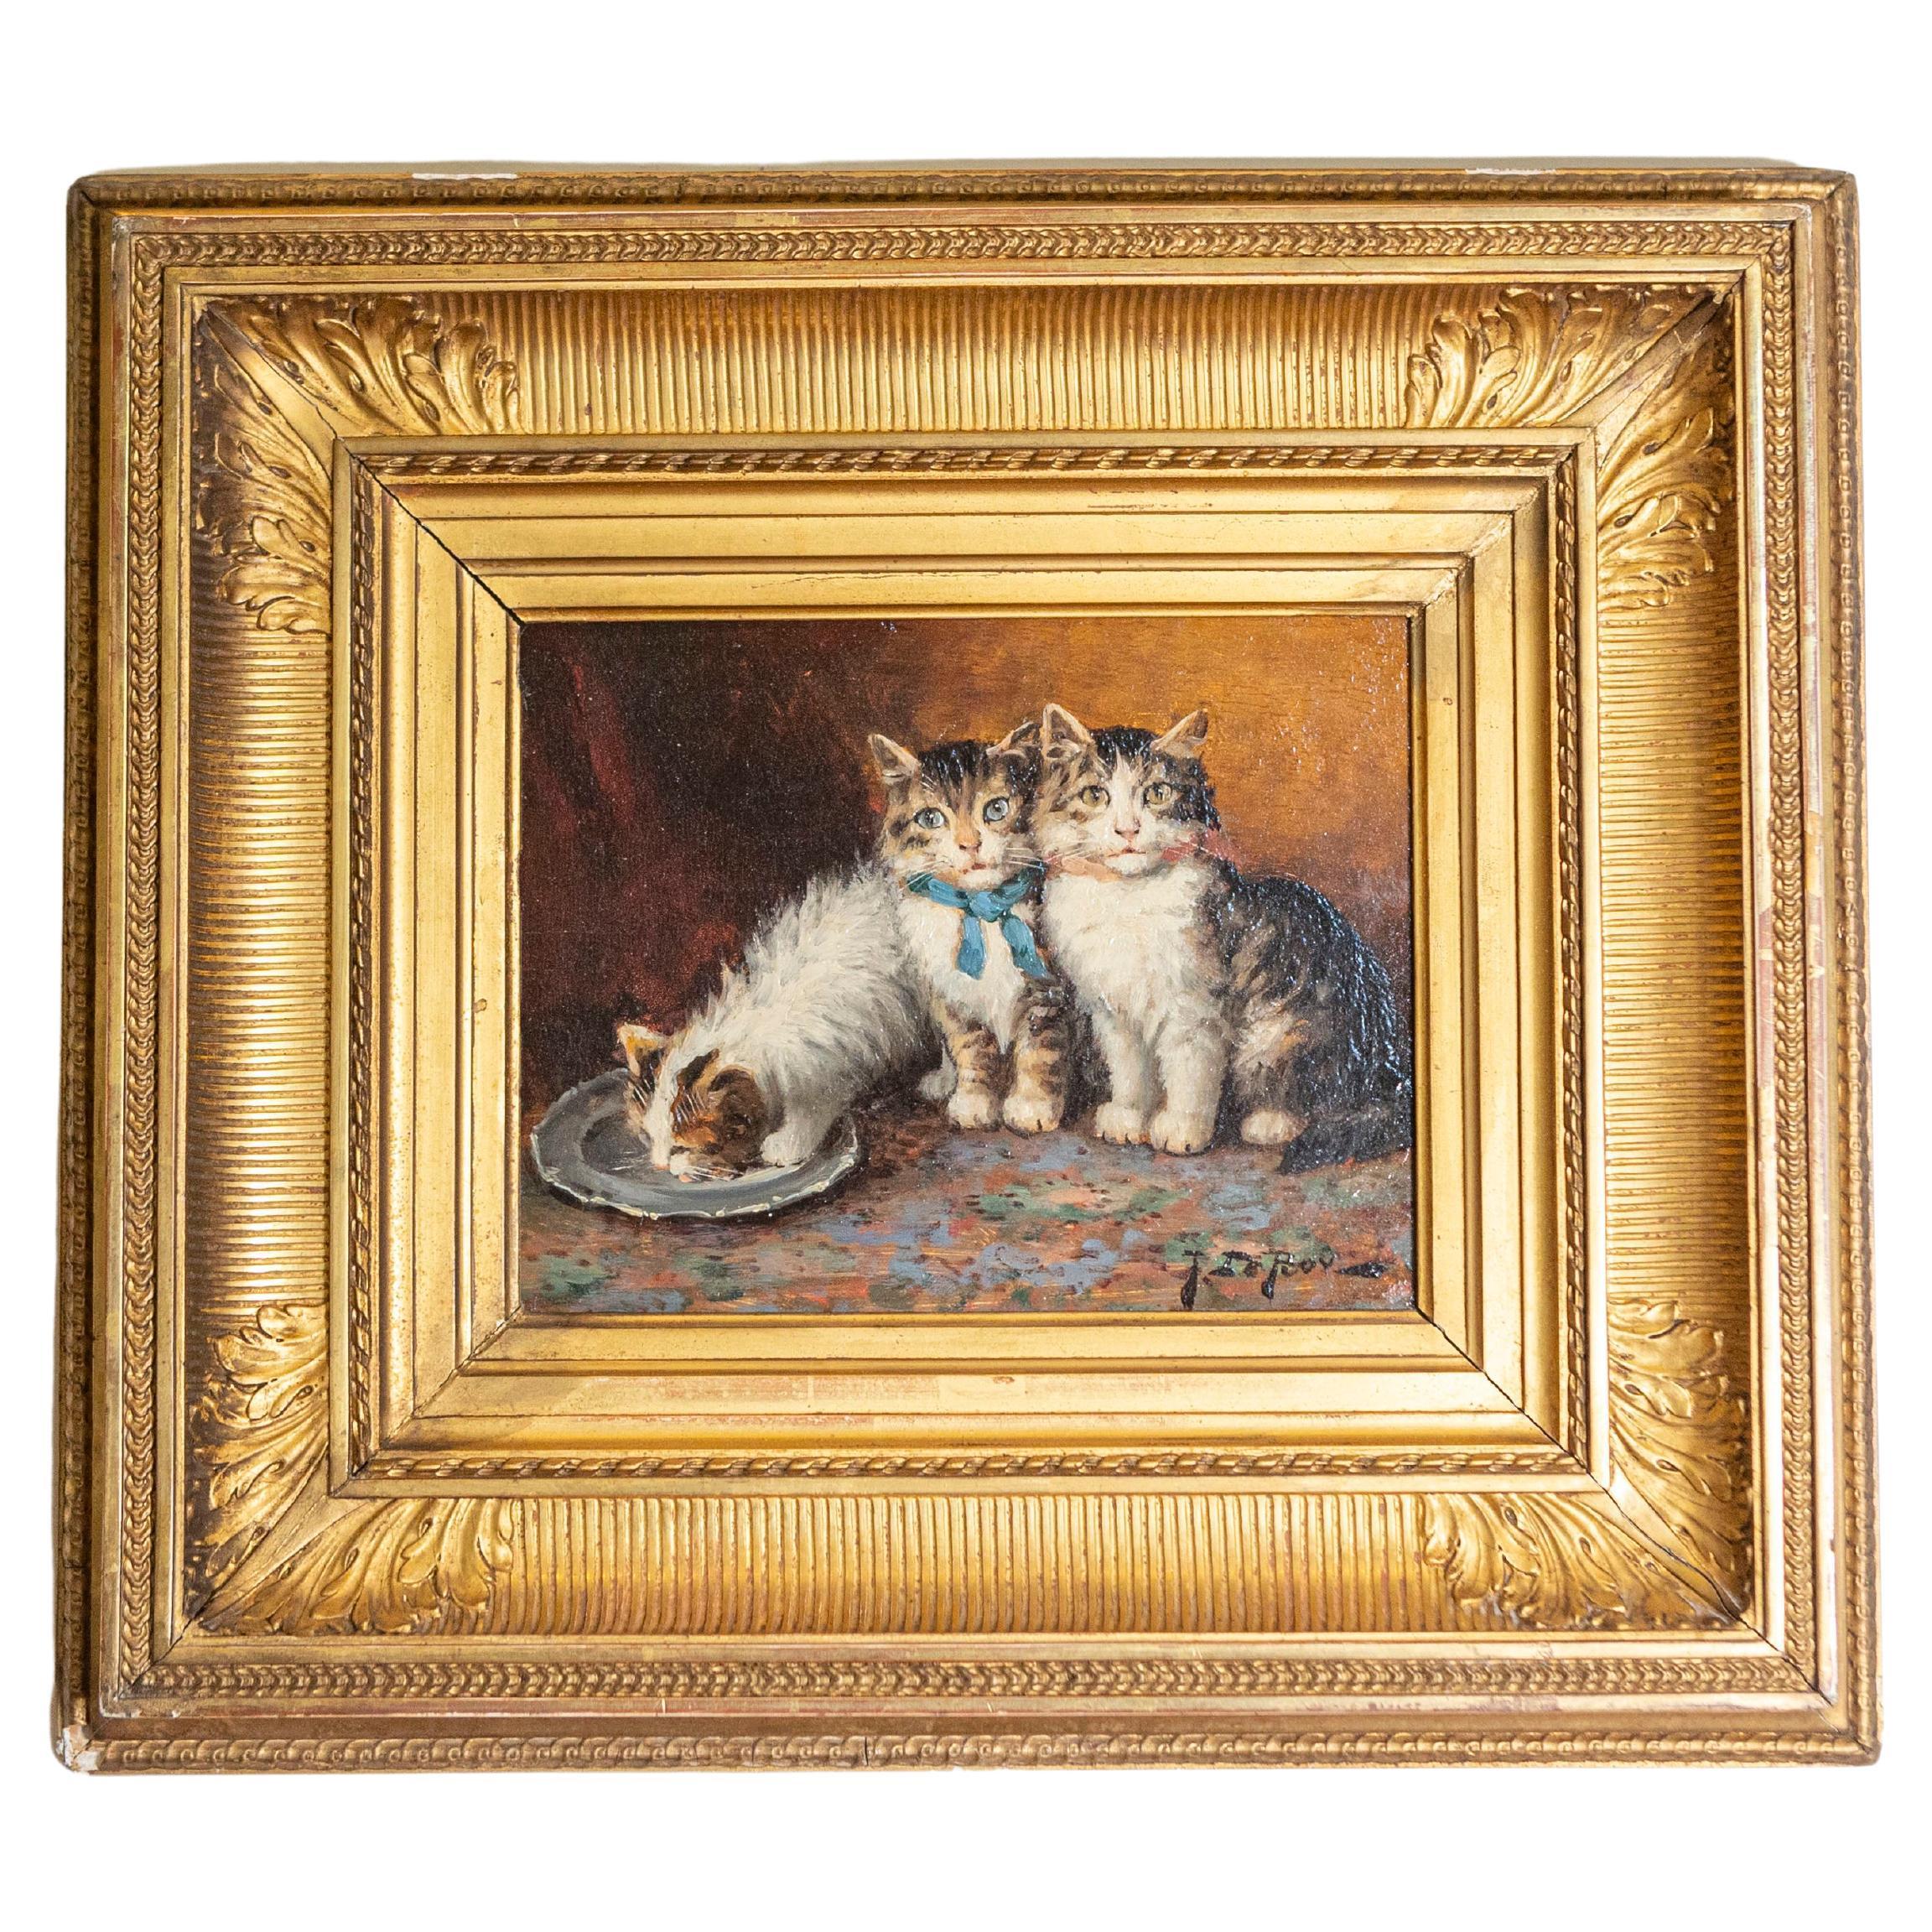 French Giltwood Framed Oil on Panel Kitten Painting Signed Jules Le Roy